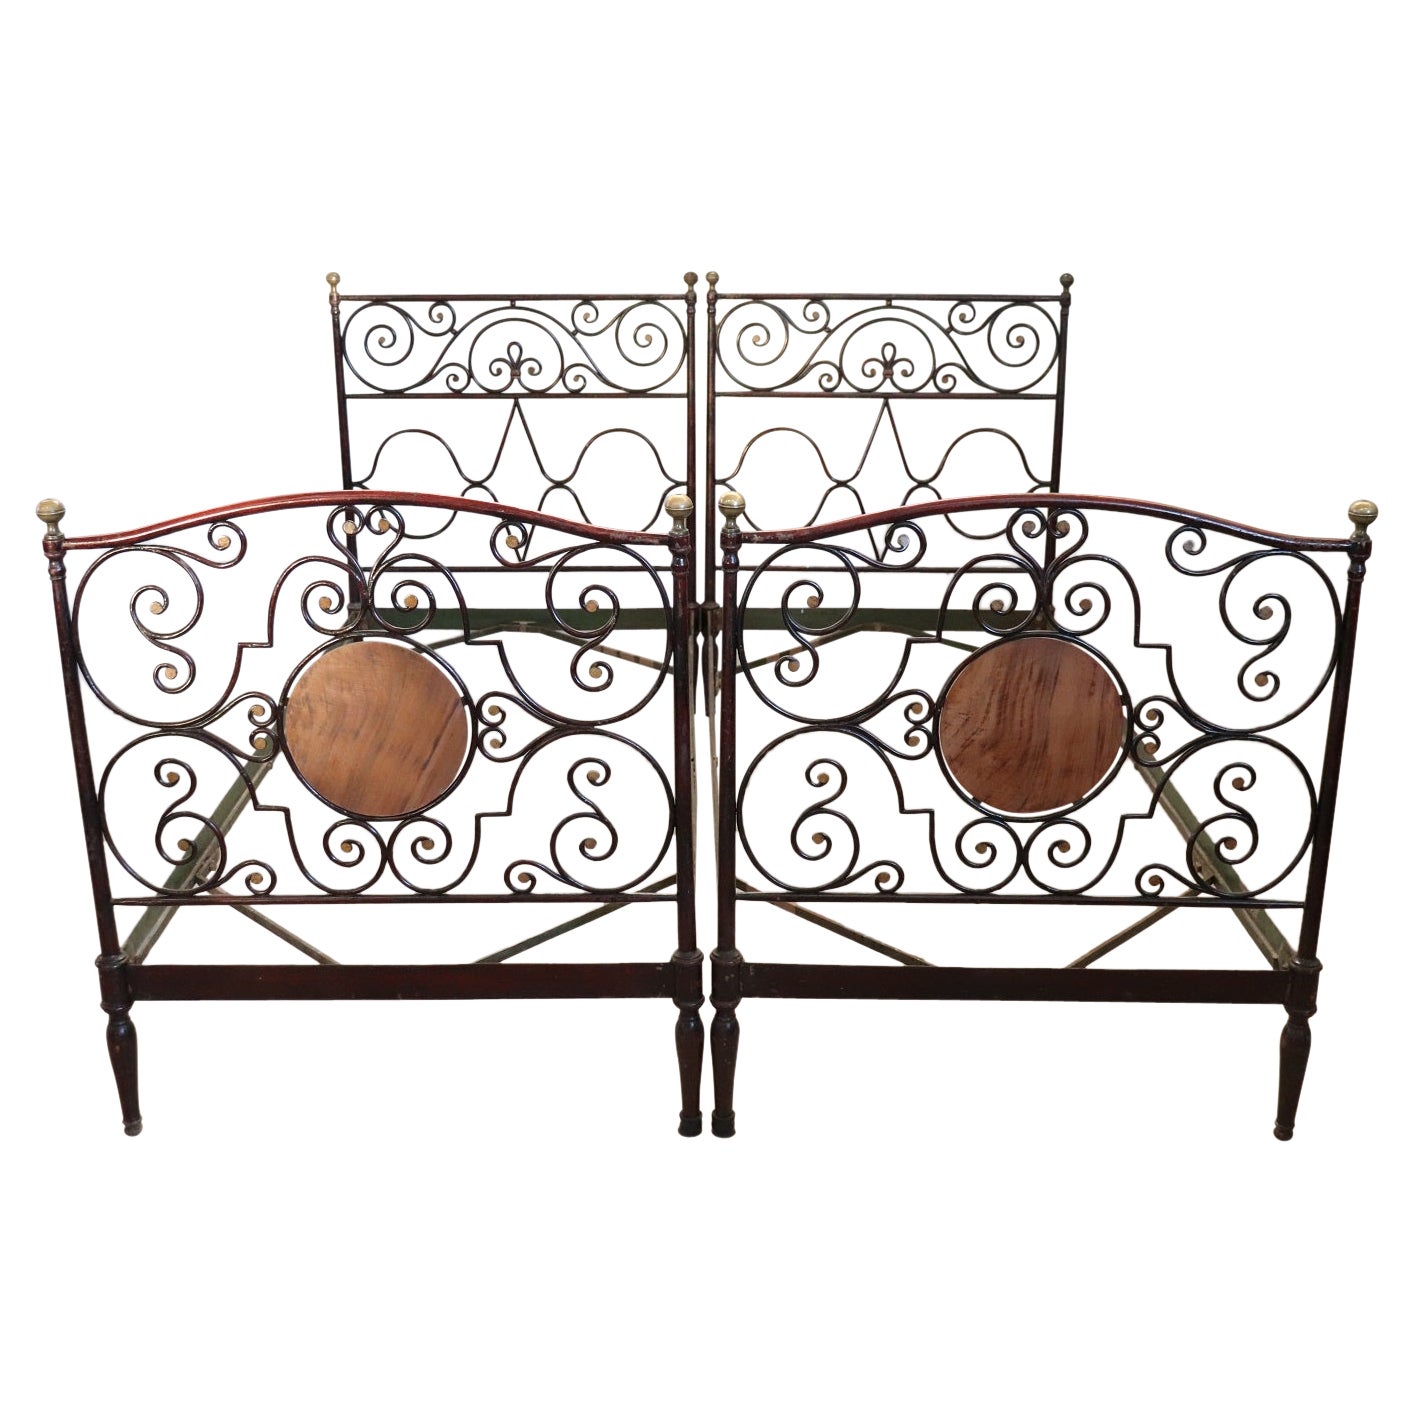 19th Century Italian Antique Wrought Iron Pair of Single Beds For Sale